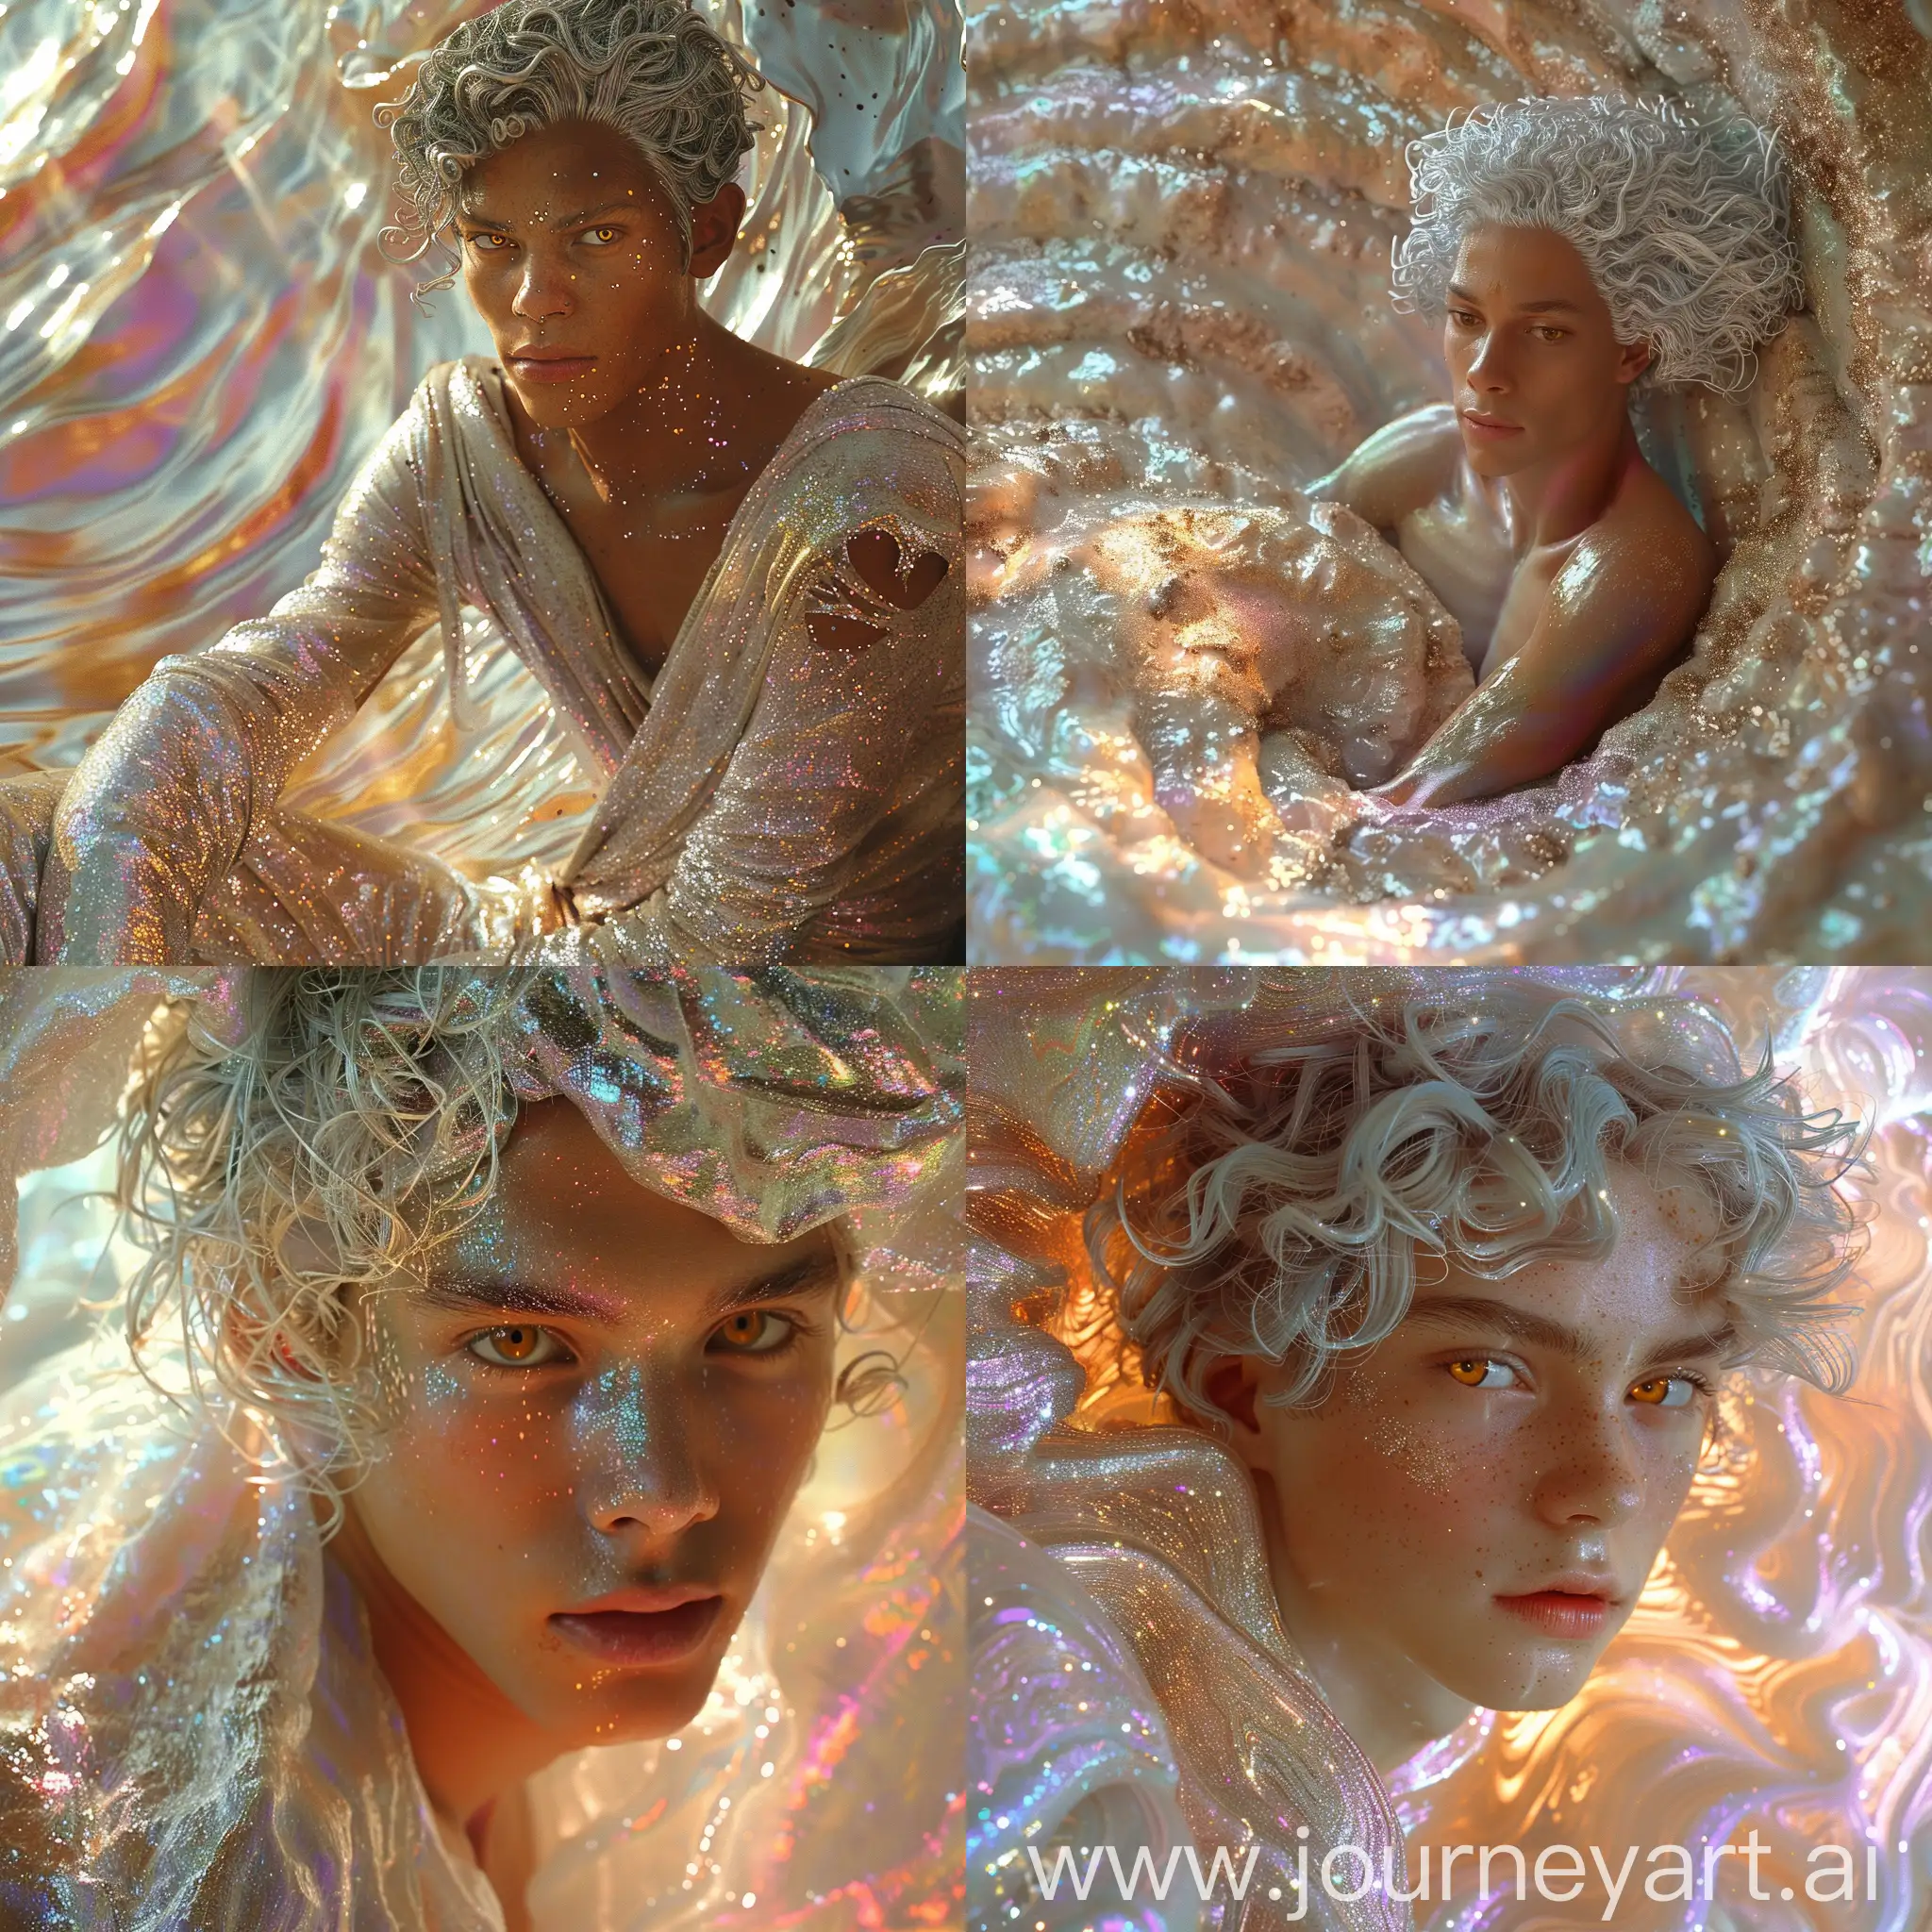 Enigmatic-Androgynous-Figure-in-Shimmering-Labyrinthine-Environment